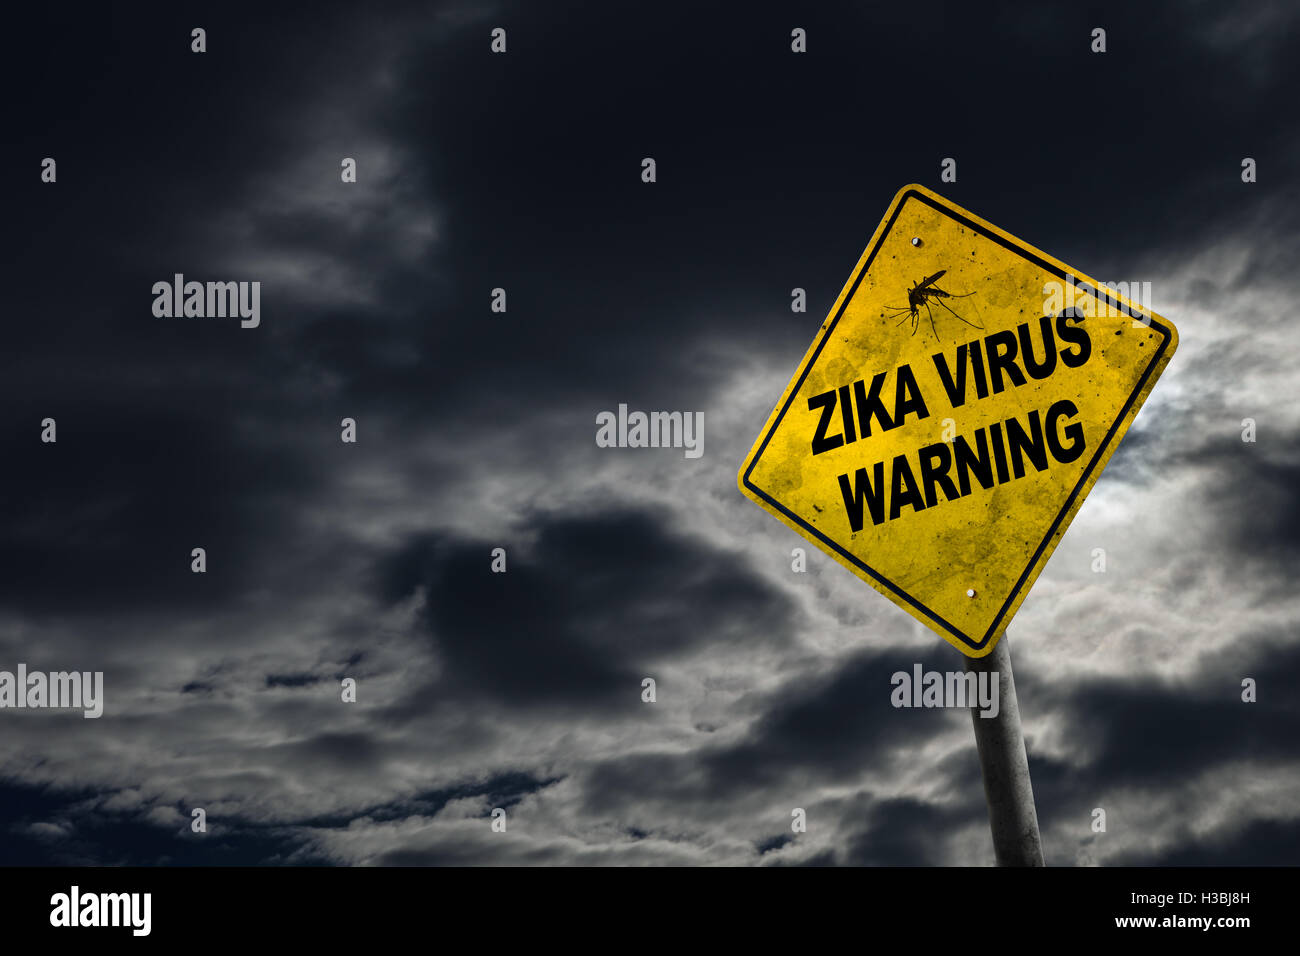 Zika virus warning sign against a stormy background with dirty and angled sign for drama. Stock Photo